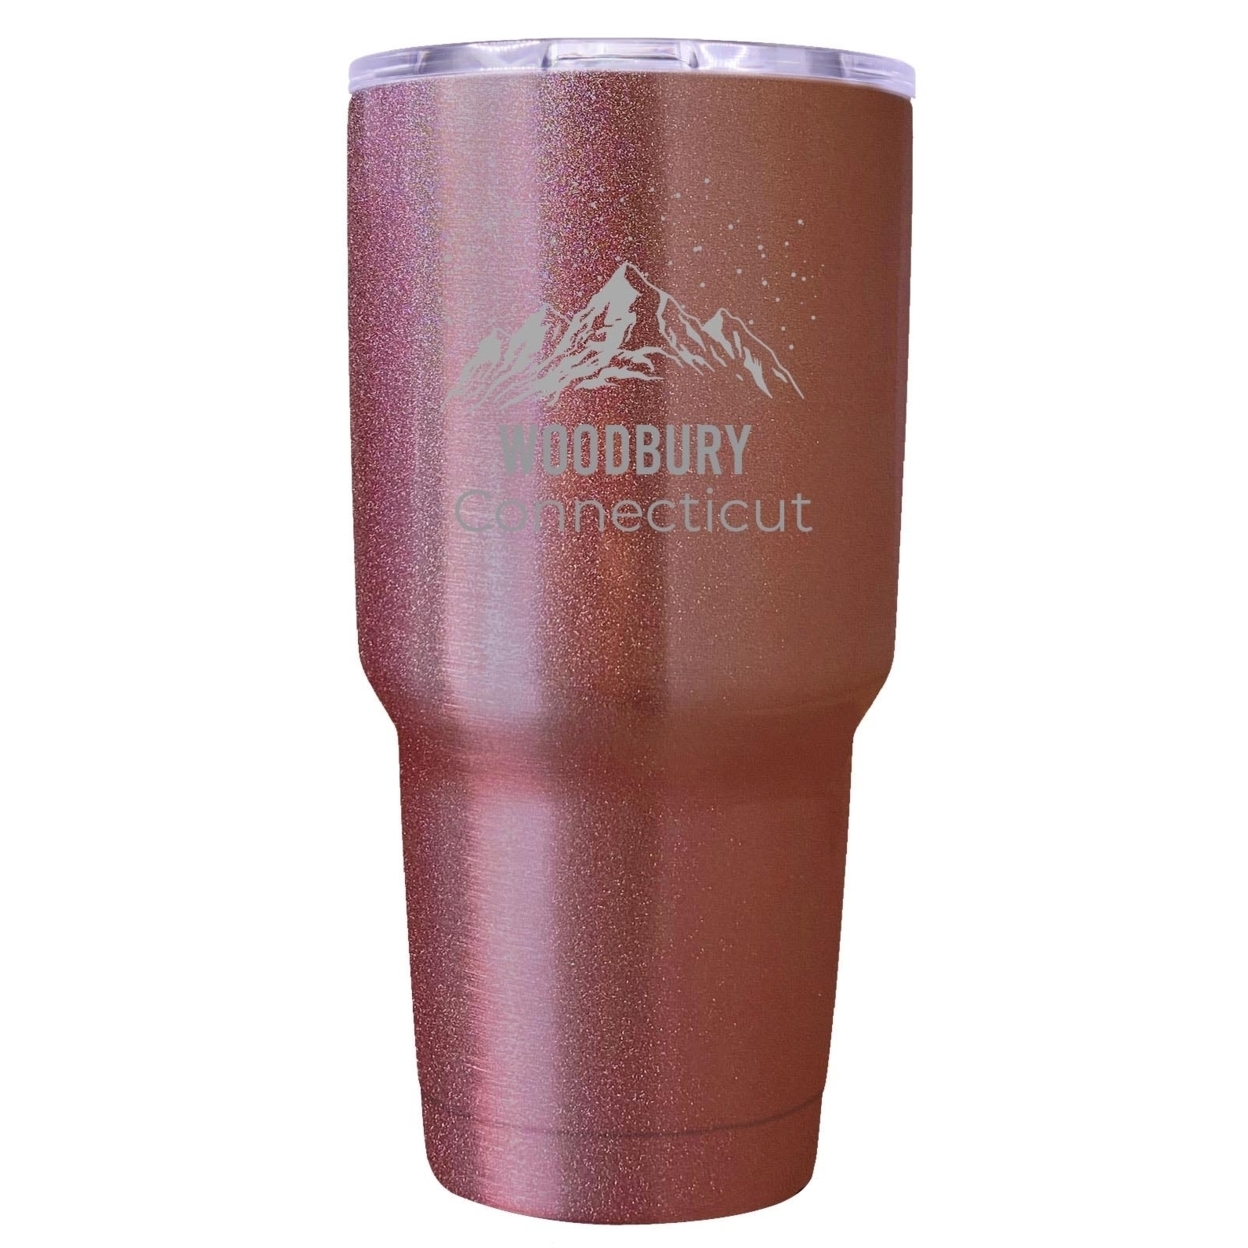 Woodbury Connecticut Ski Snowboard Winter Souvenir Laser Engraved 24 Oz Insulated Stainless Steel Tumbler - Rose Gold